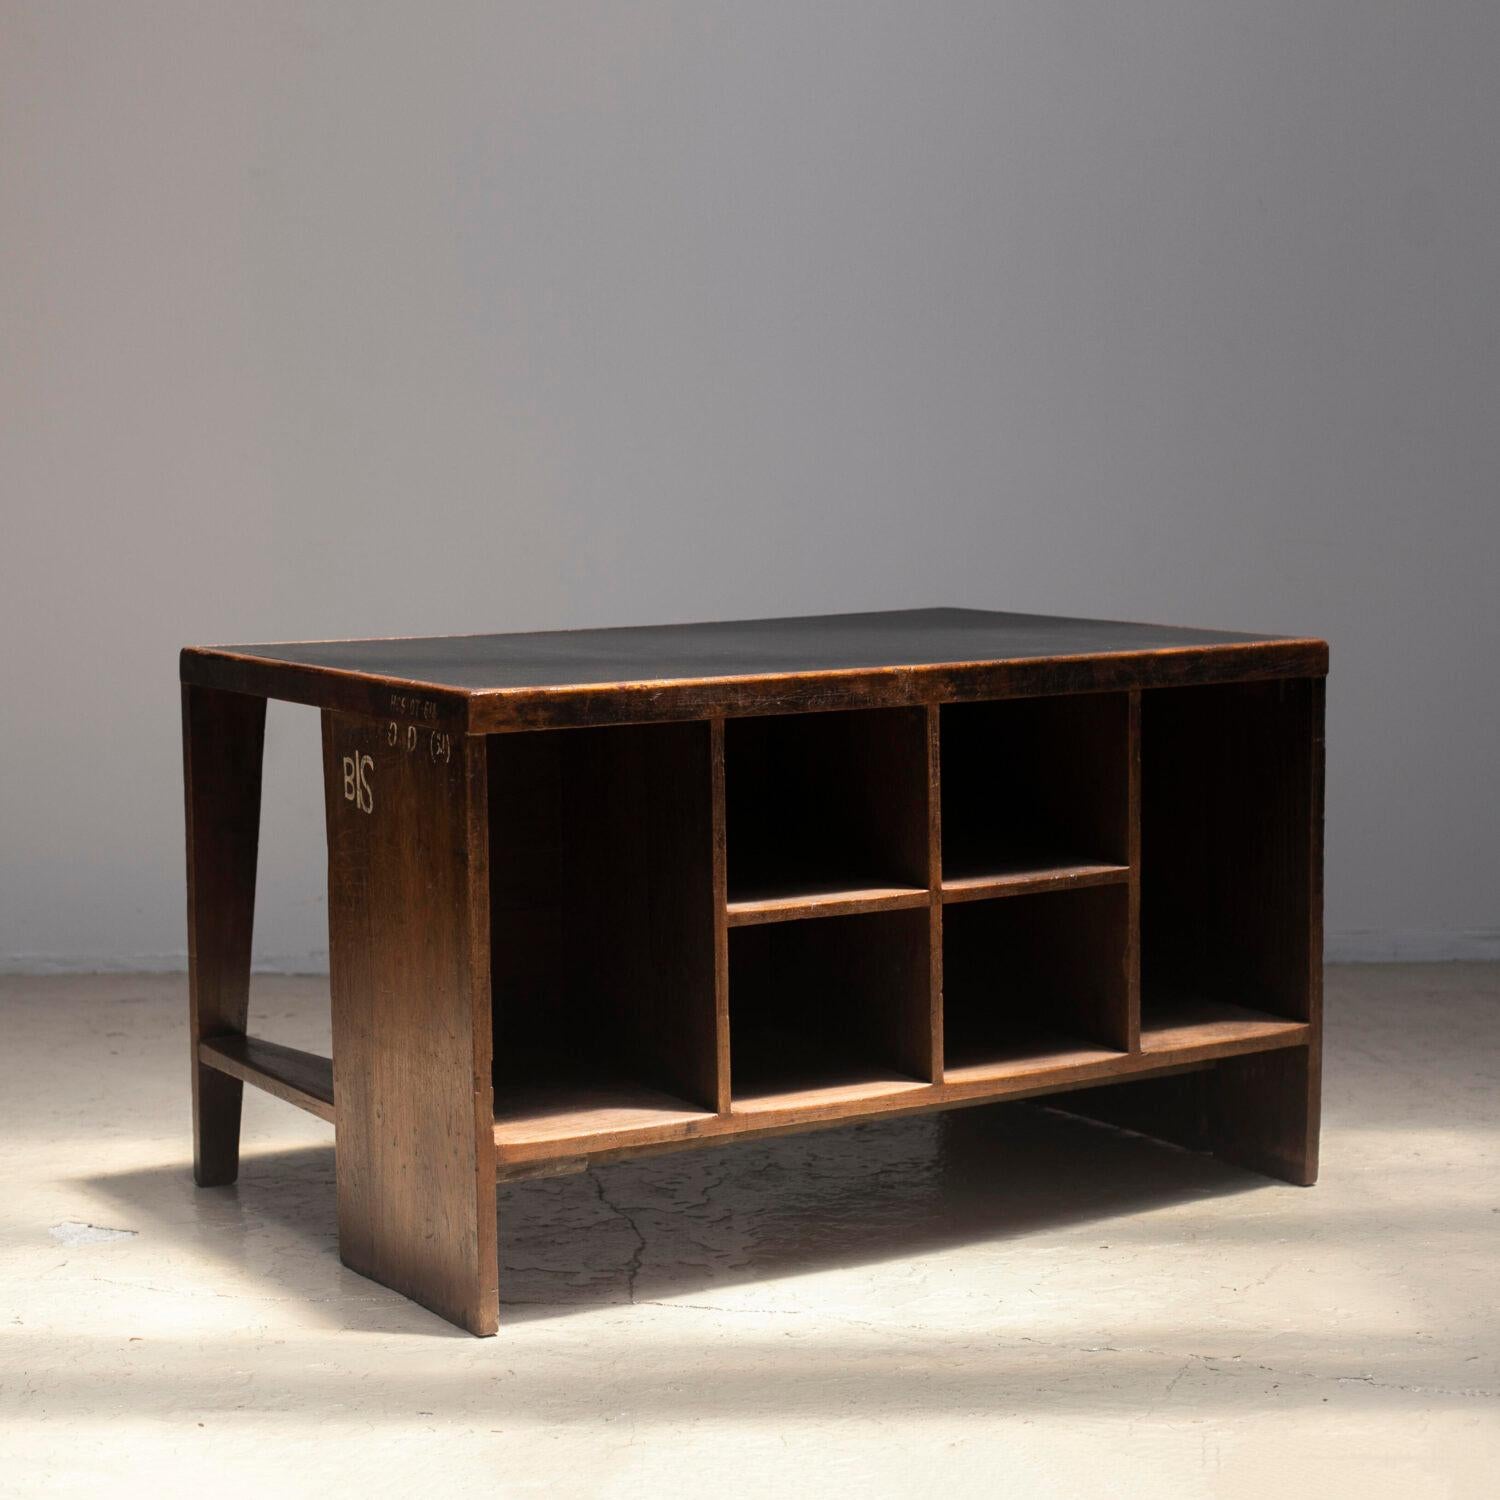 Pigeonhole desk designed by Pierre Jeanneret for the High Court, Legislative Assembly and various administrative bodies in Chandigarh. 1957-58s. Wood and faux leather. The top is re-covered with black faux leather.

Provenance: High Court,